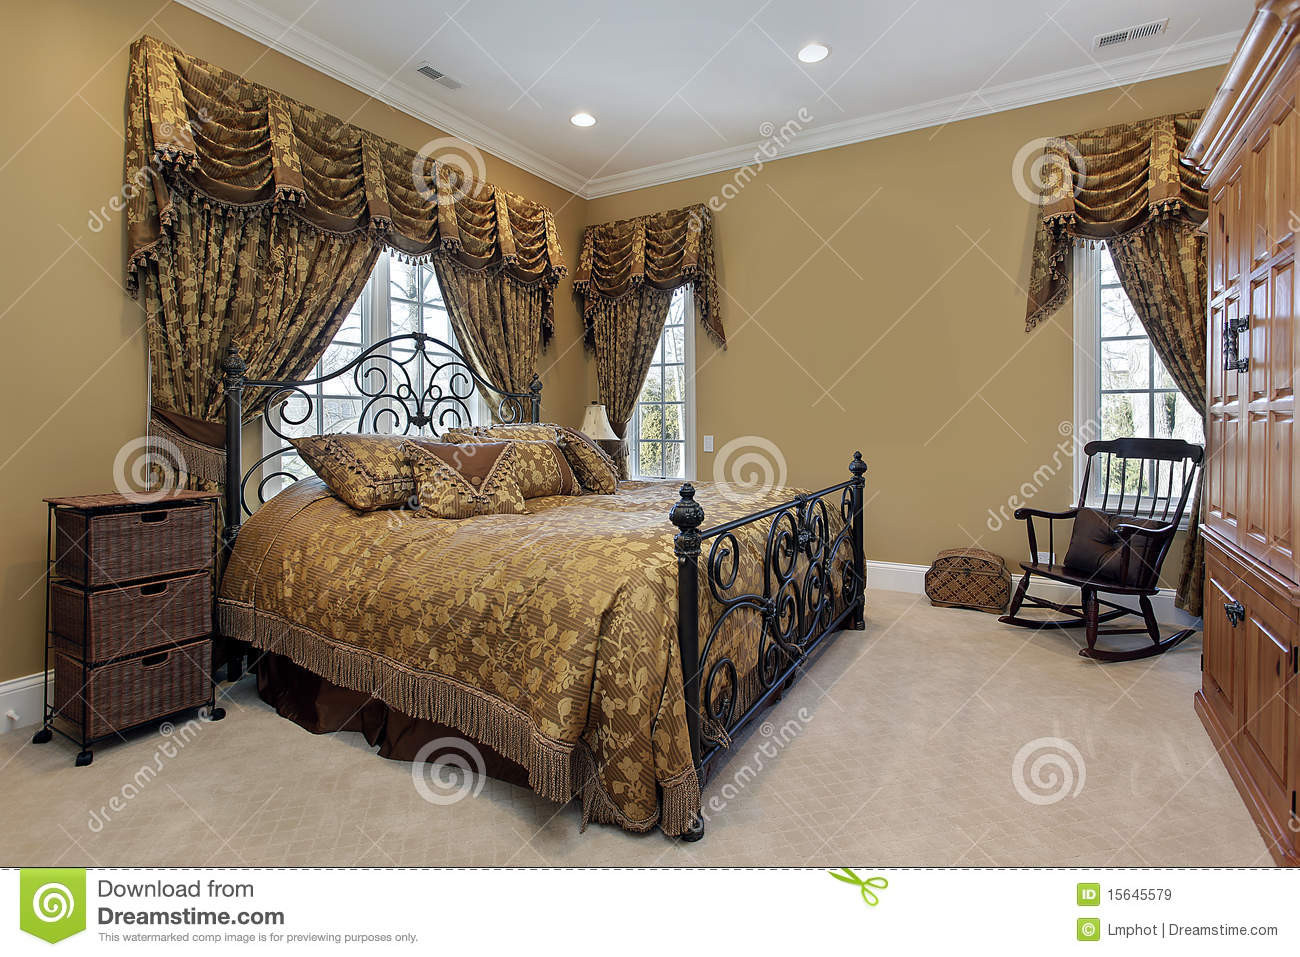 Gold Bedroom Walls
 Master Bedroom With Gold Walls Stock Image Image of